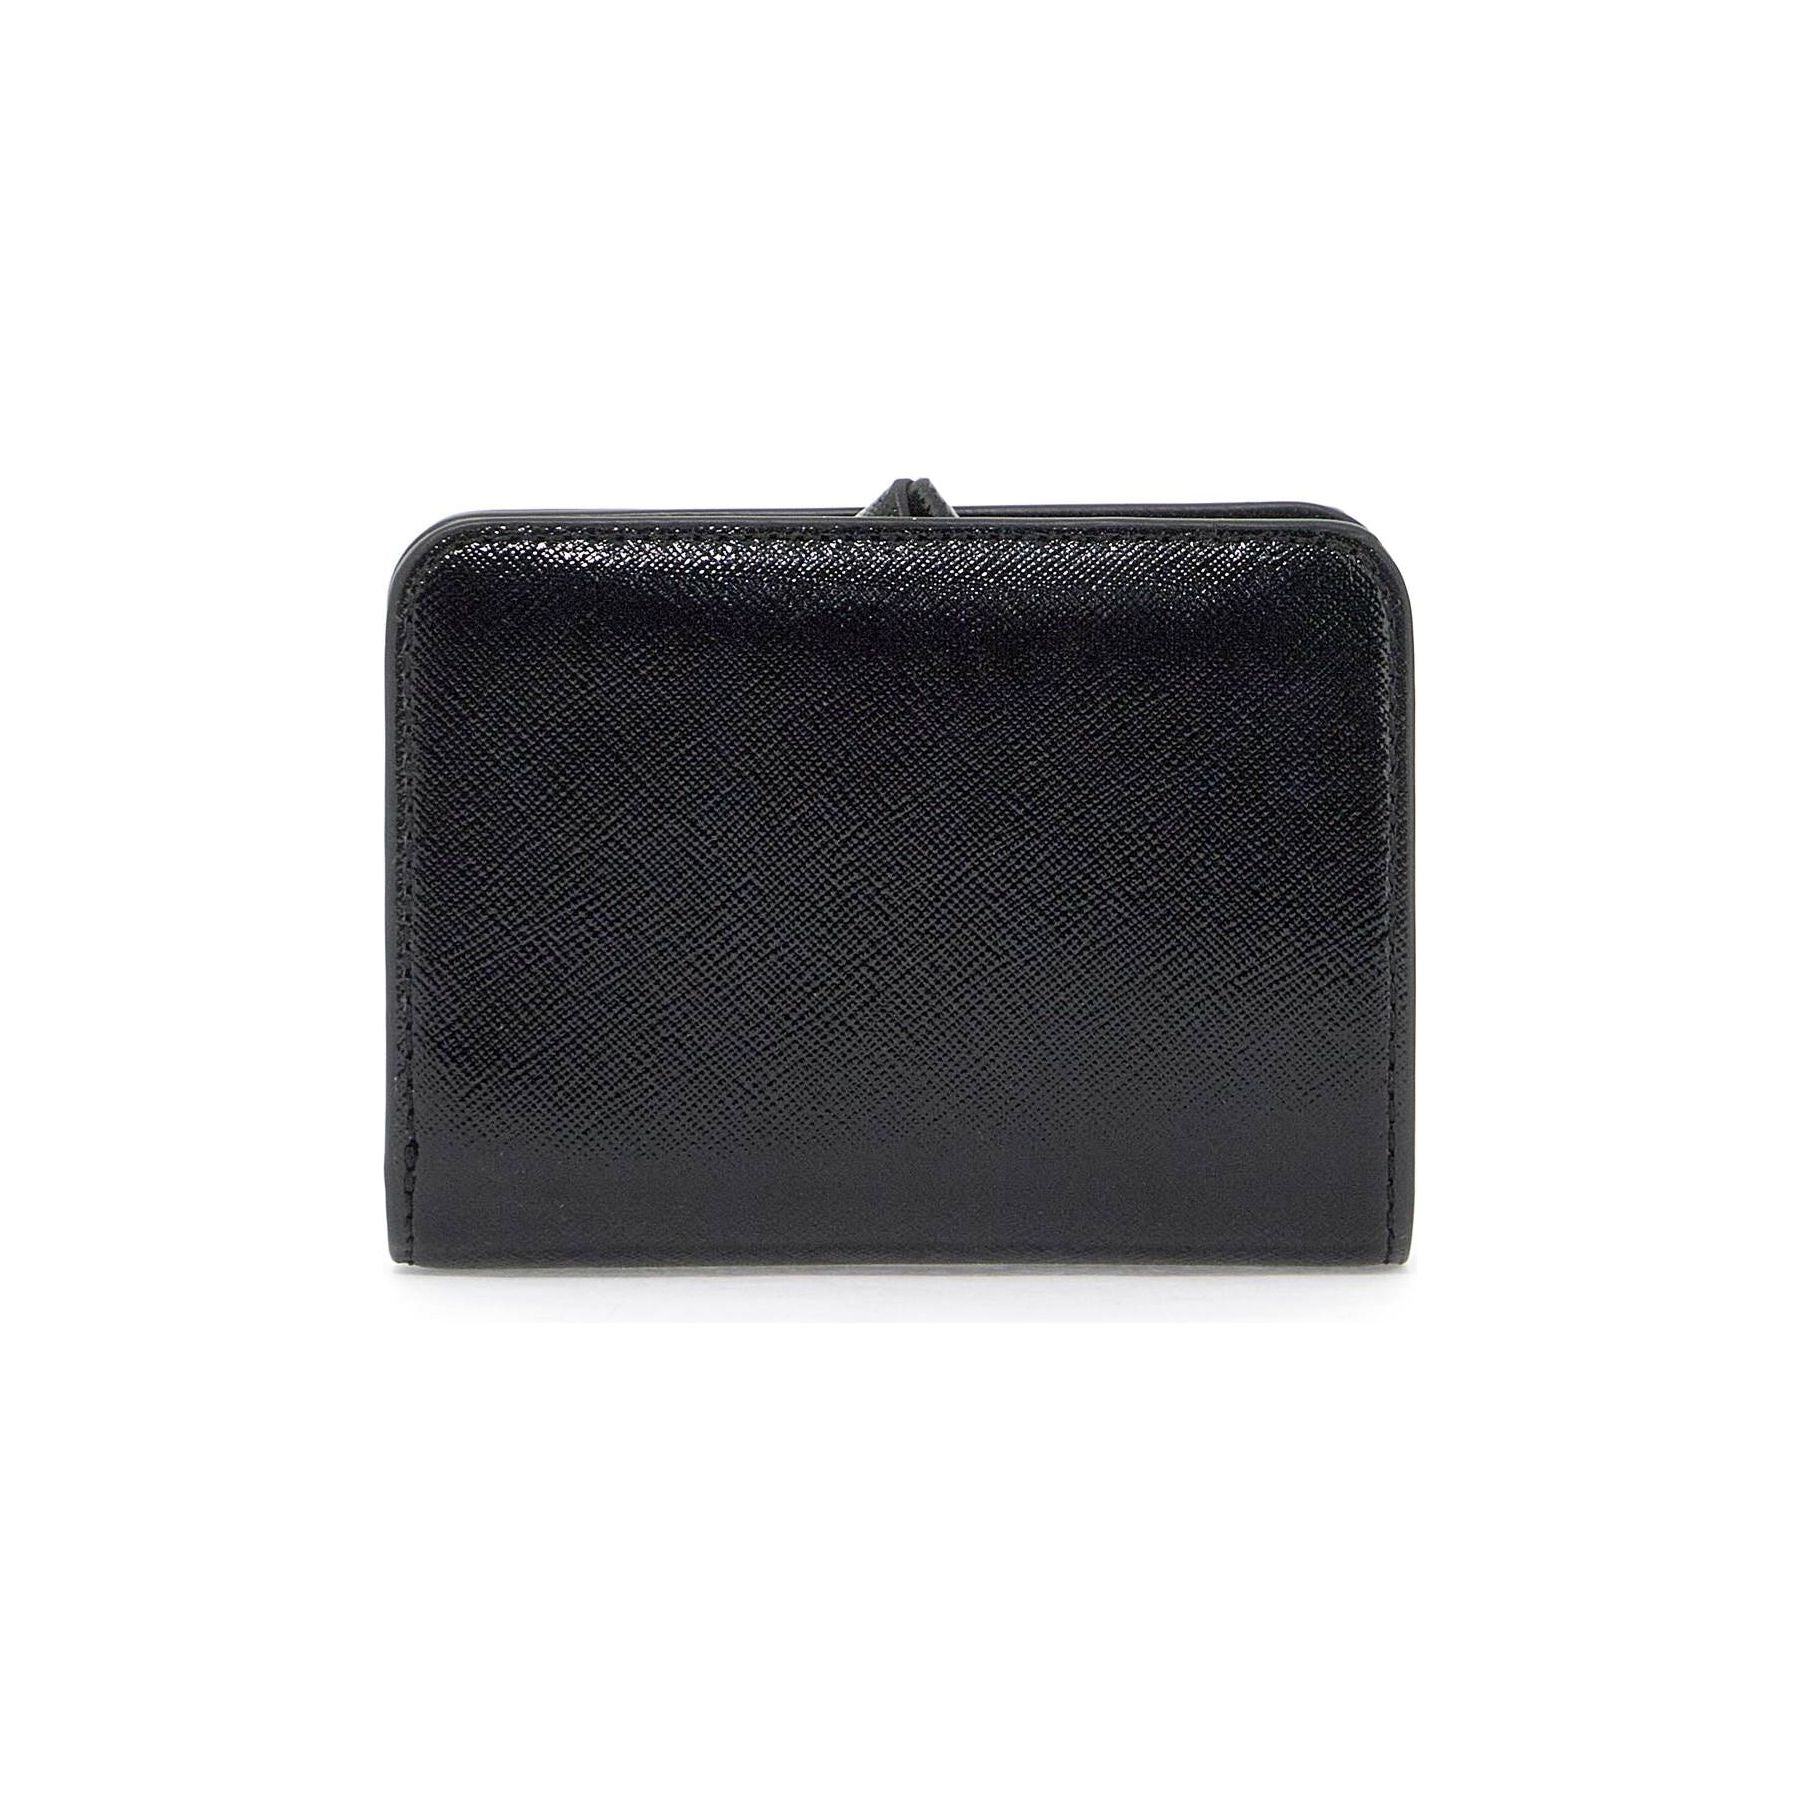 The Utility Snapshot Mini Compact Wallet